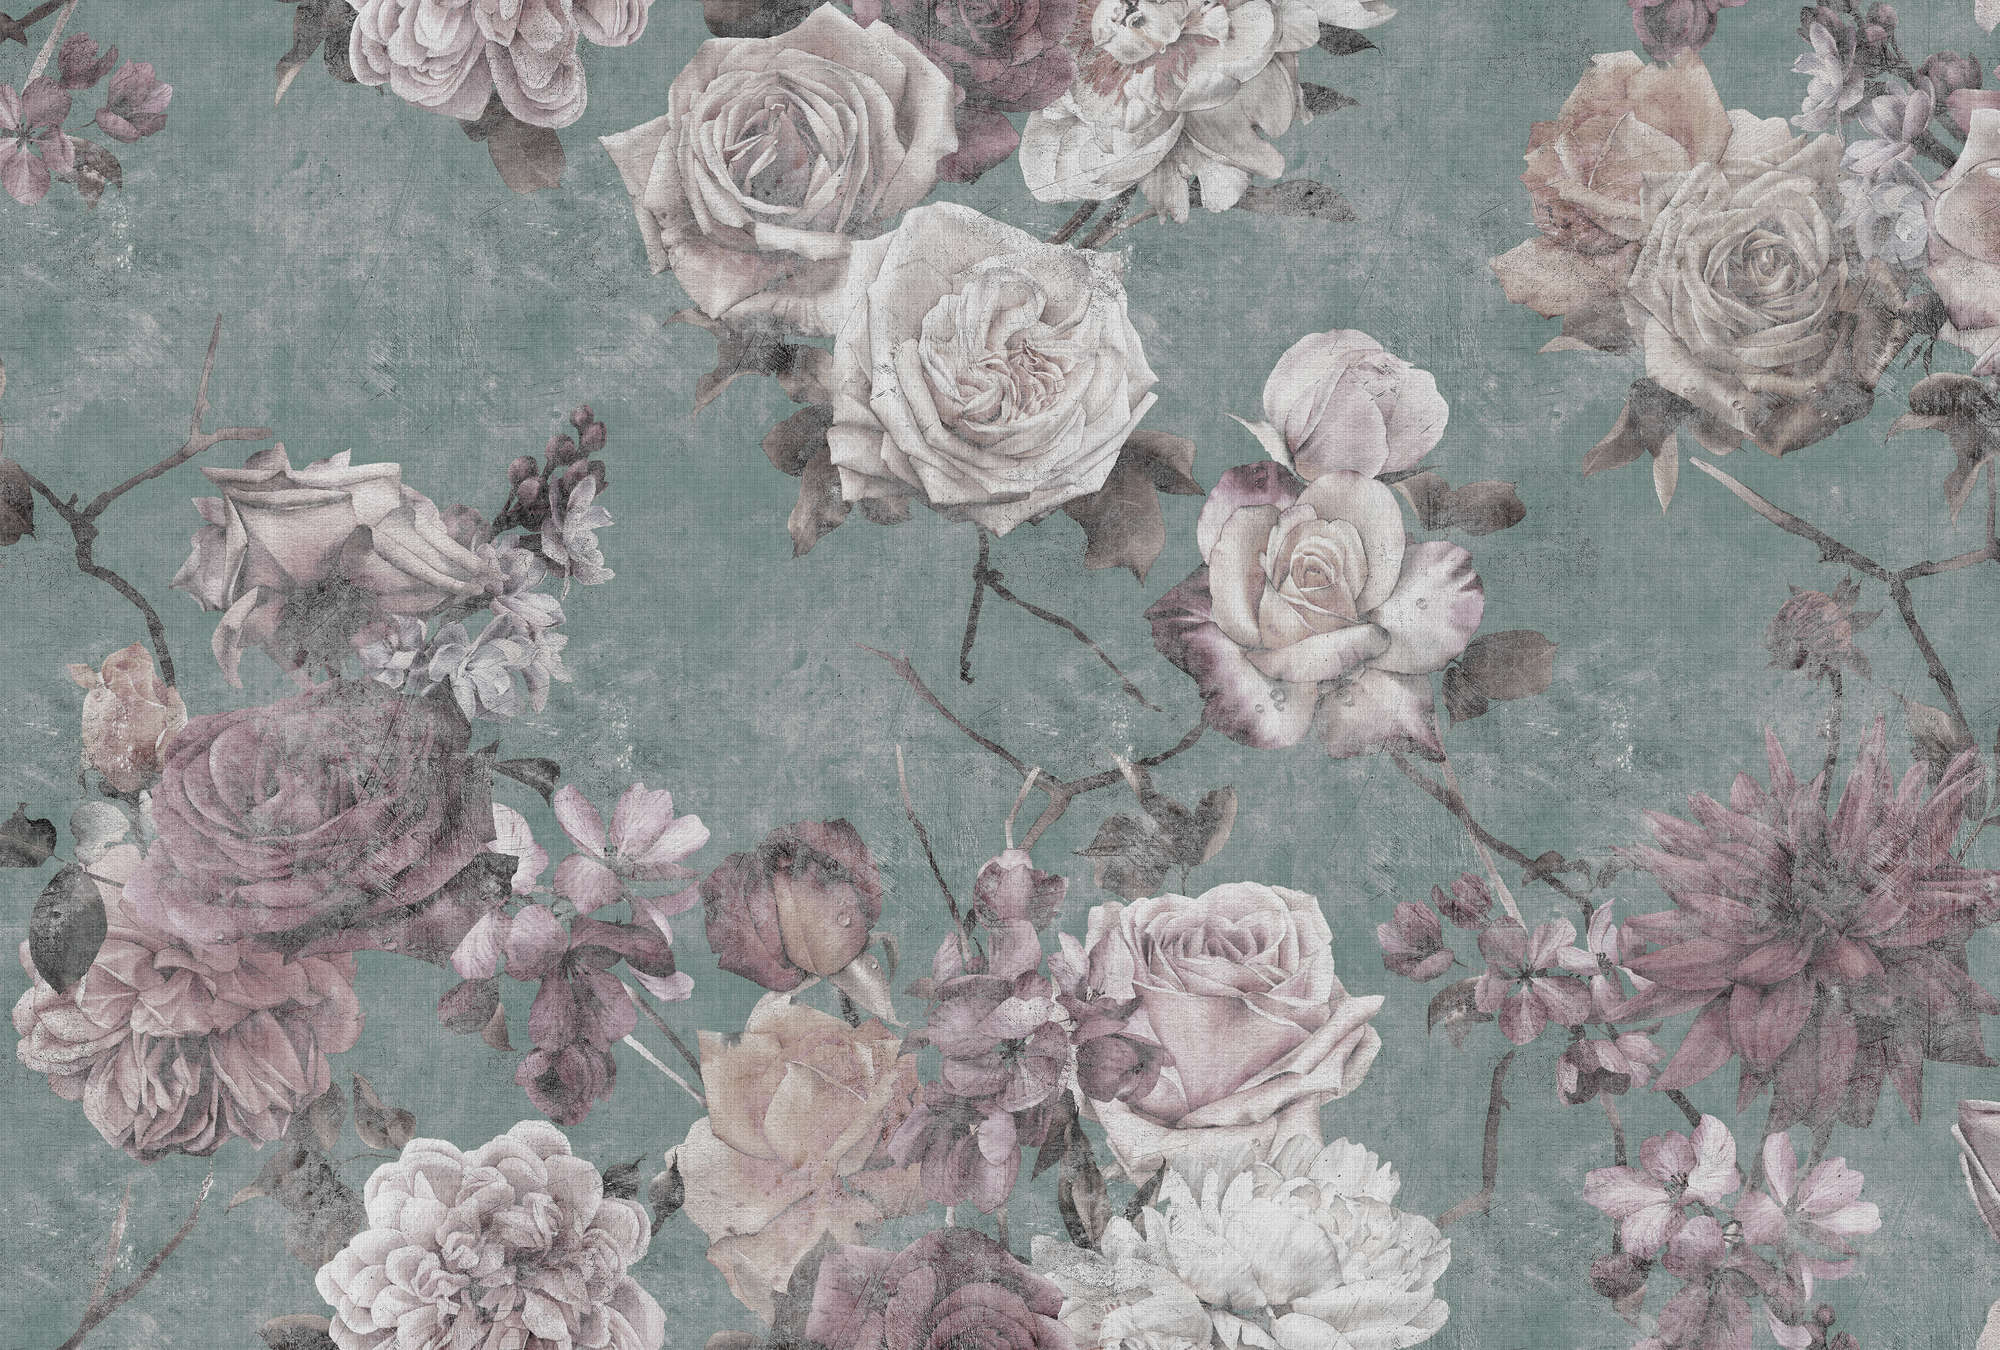             Sleeping Beauty 2 - Vintage Style Rose Blossoms Wallpaper - Nature Linen Texture - Pink, Turquoise | Matte Smooth Non-woven
        